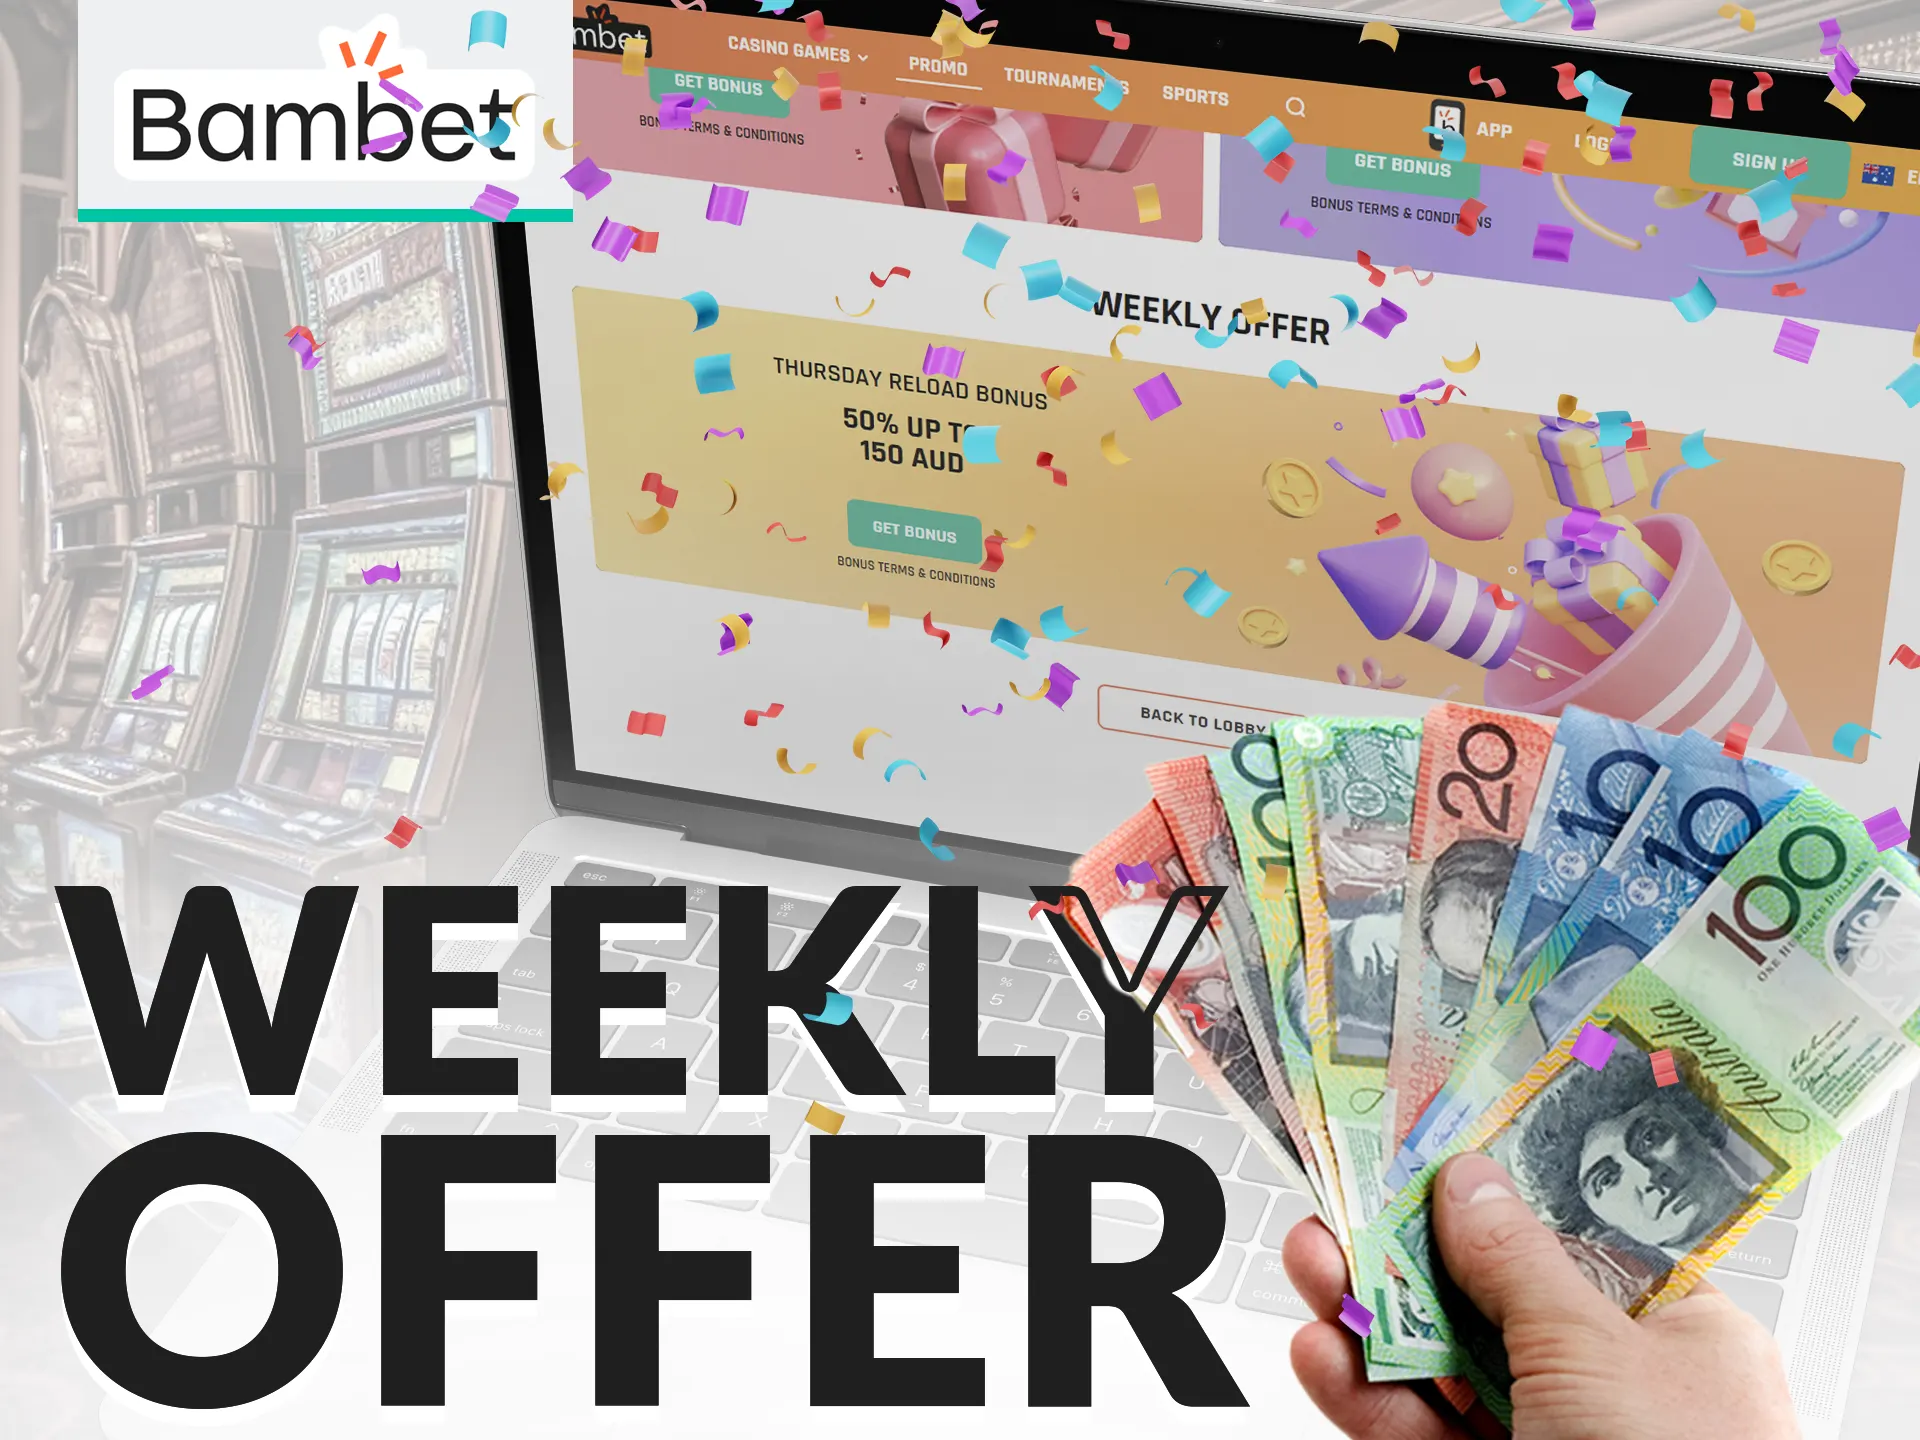 Bambet introduces a recurring weekly offer.